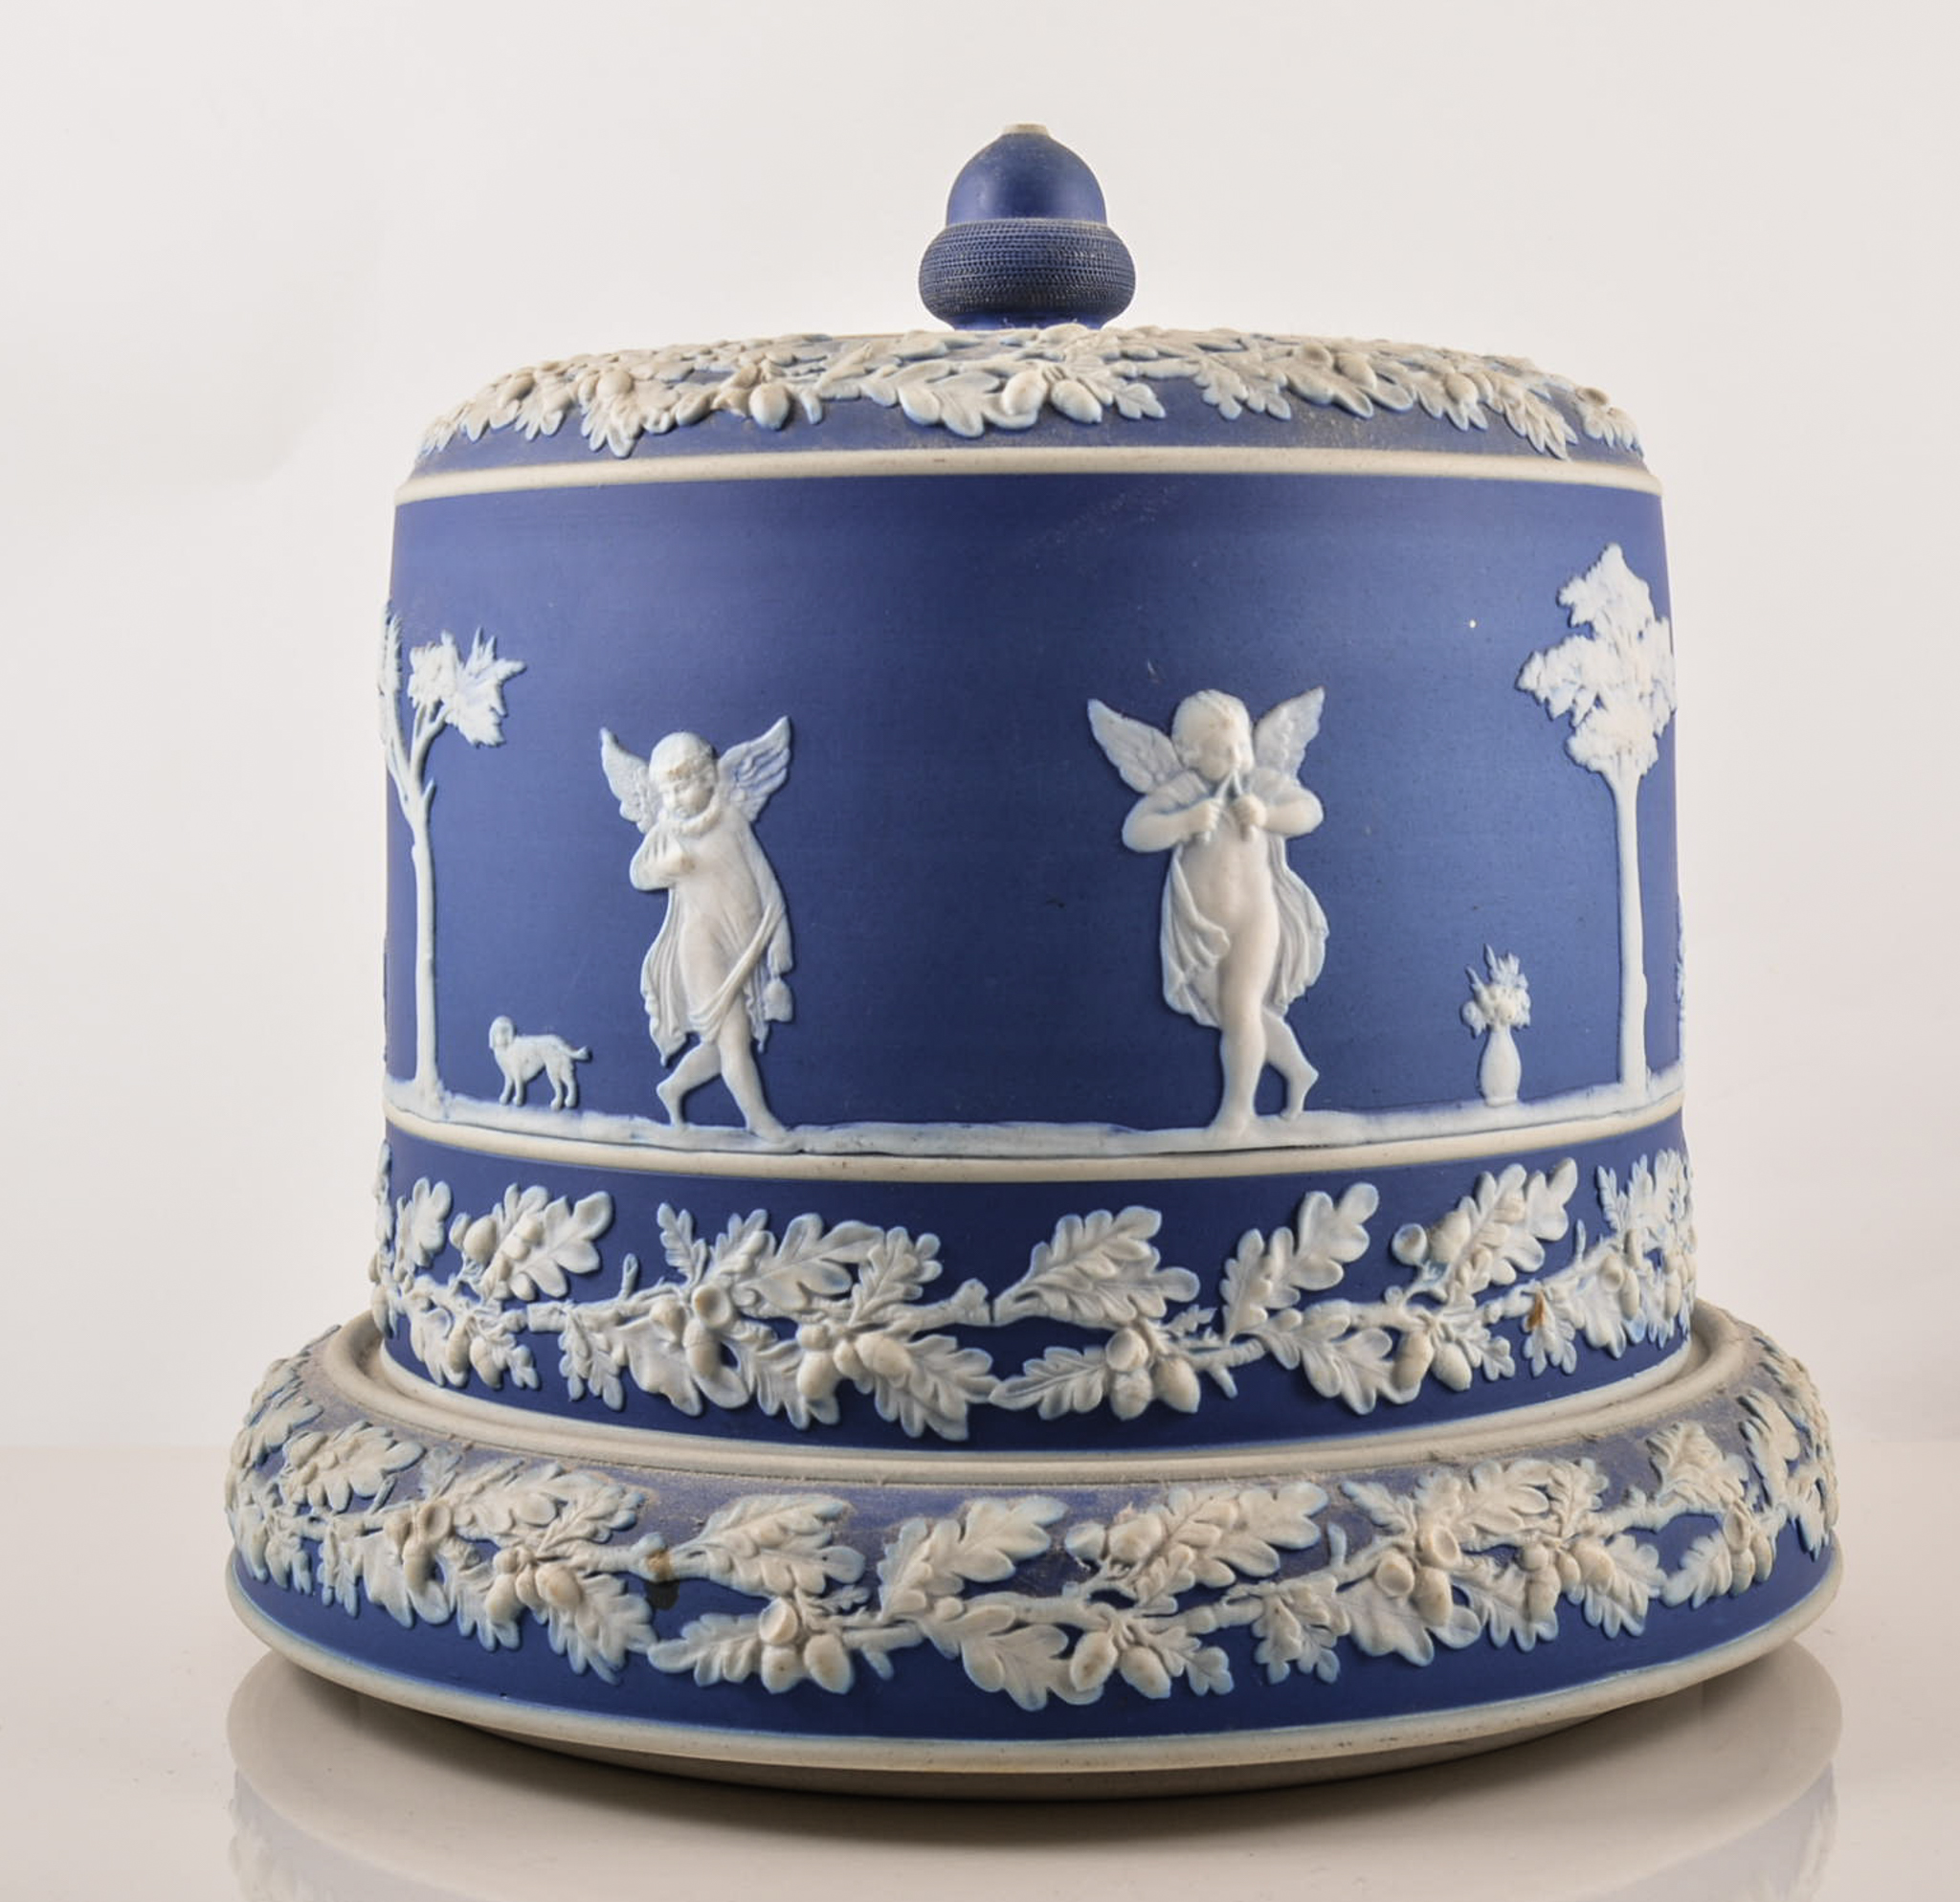 Wedgwood blue and white "Jasperware", stilton cheese dome and base, height 26cms.